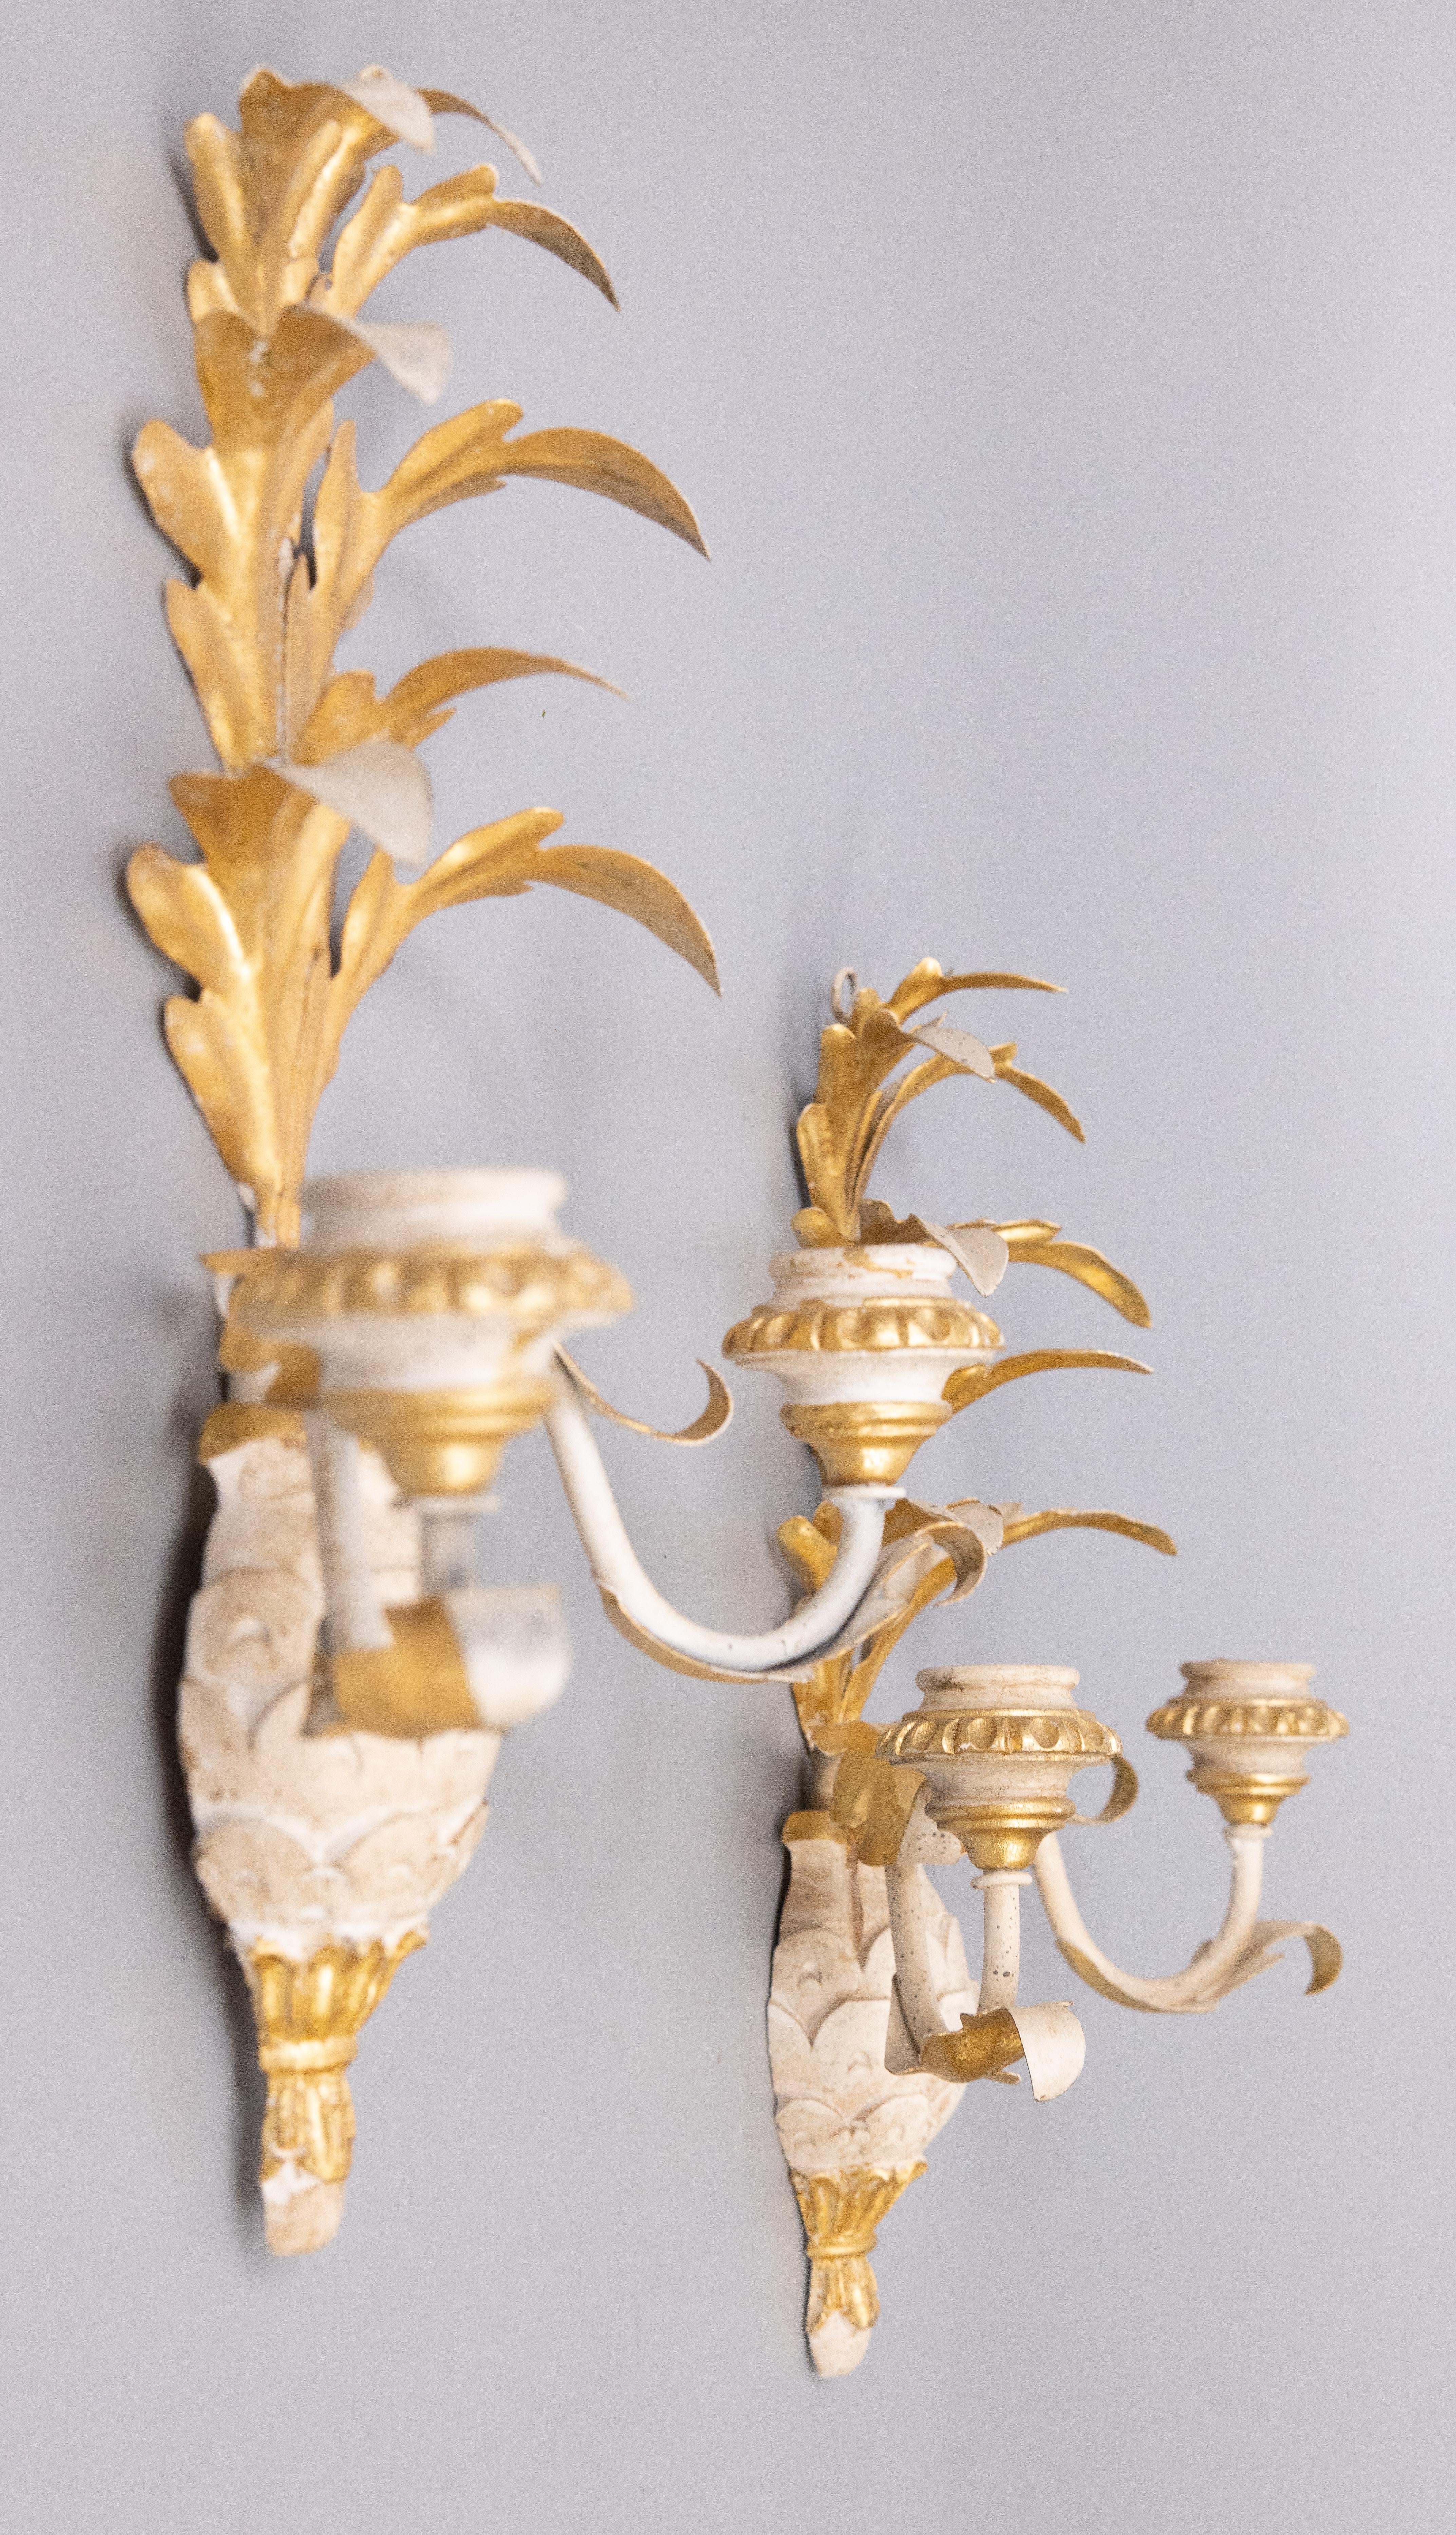 Tôle Pair of Mid-20th Century Italian Giltwood & Tole Pineapple Candle Sconces